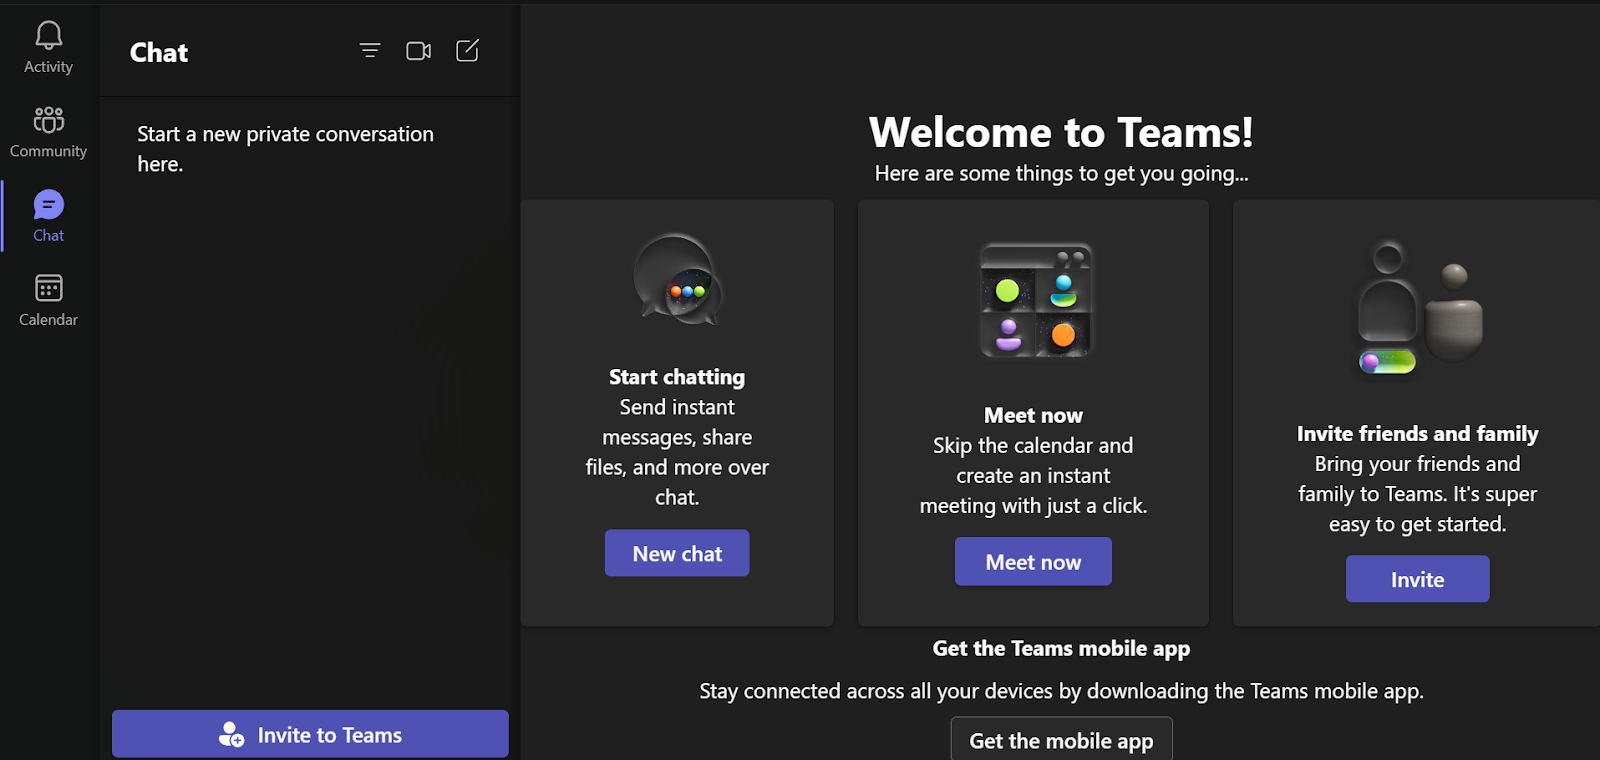 Microsoft Teams website snapshot highlighting the services it offers.